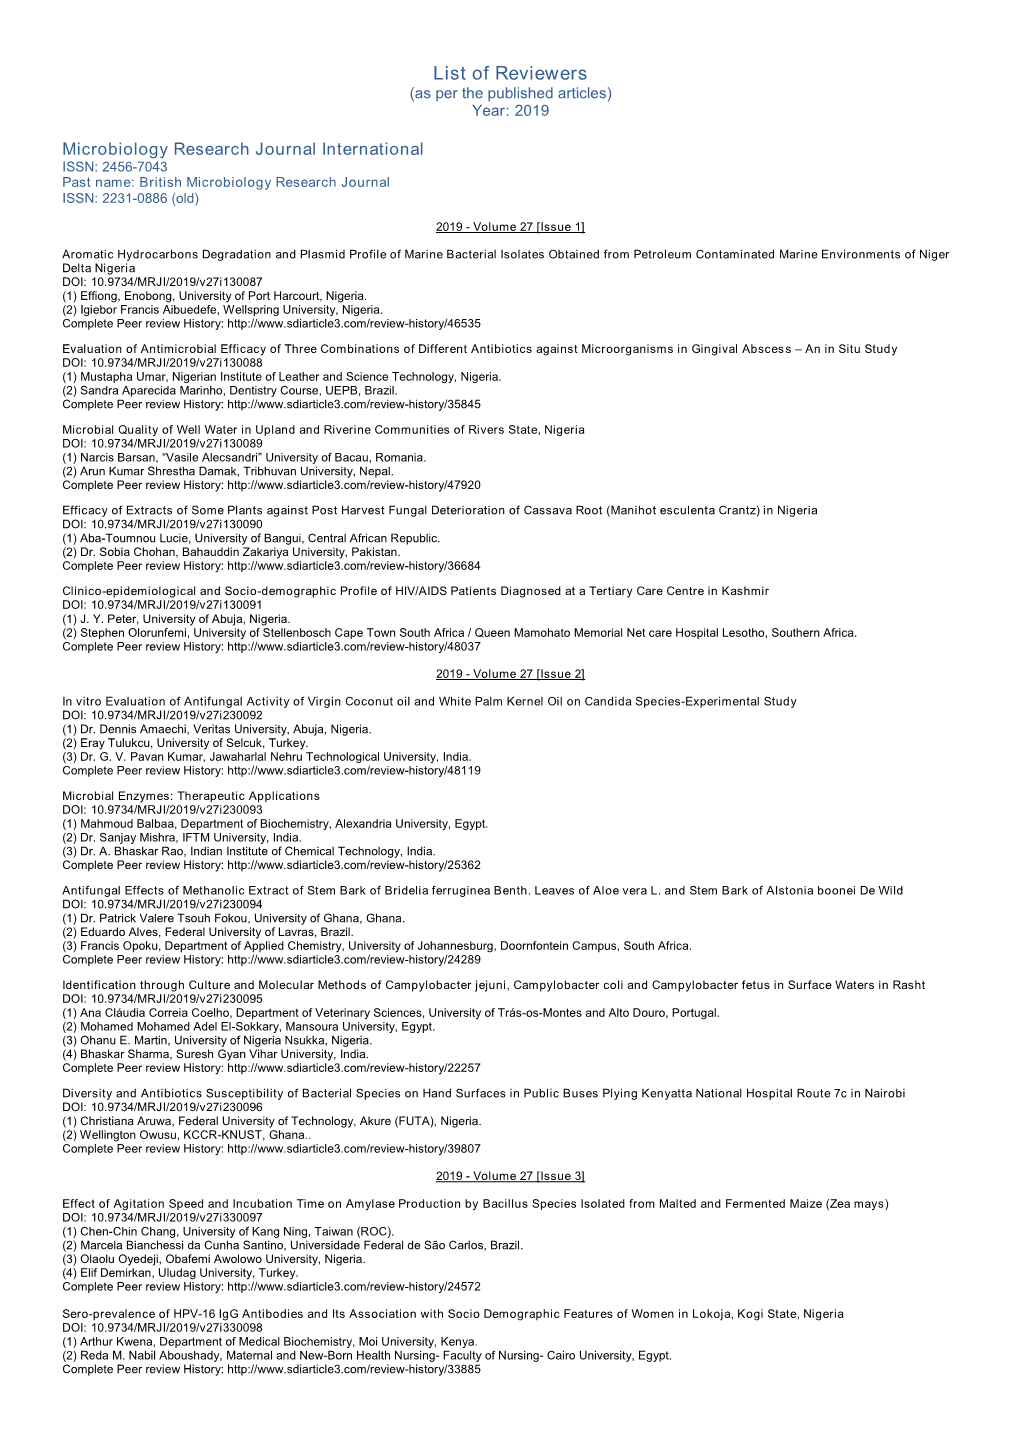 List of Reviewers (As Per the Published Articles) Year: 2019